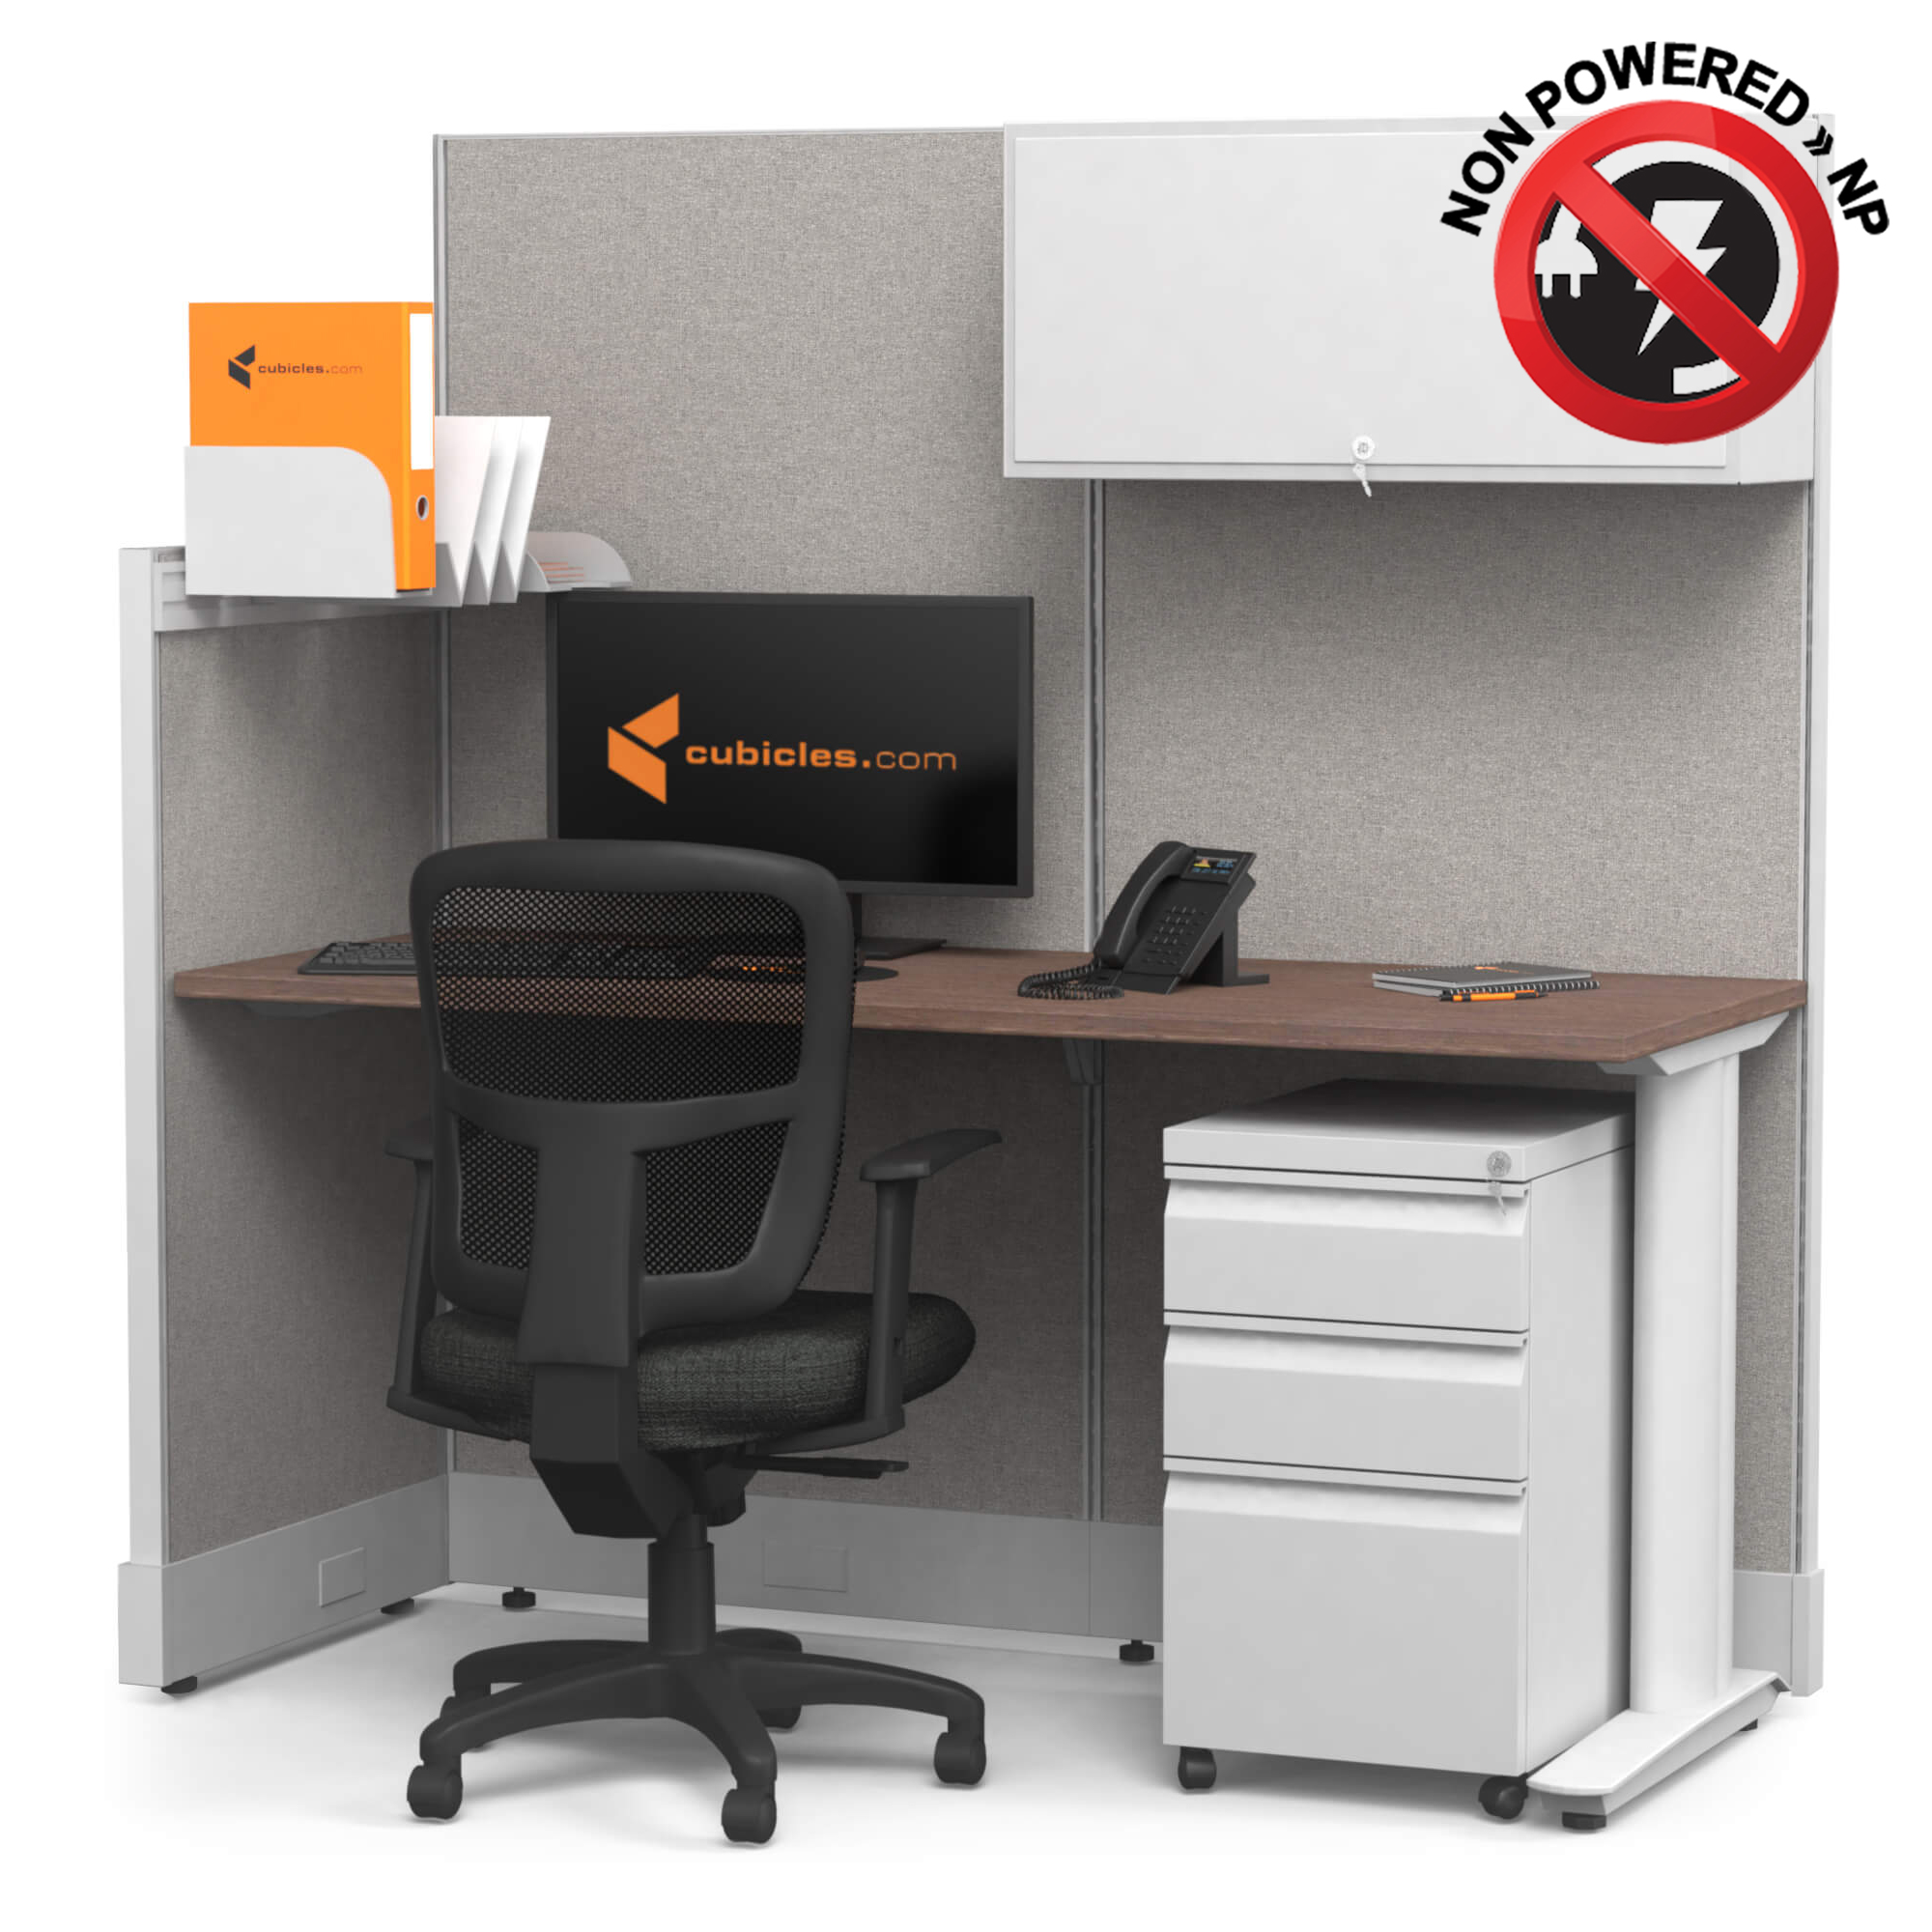 Cubicle desk straight with storage 1pack non powered sign